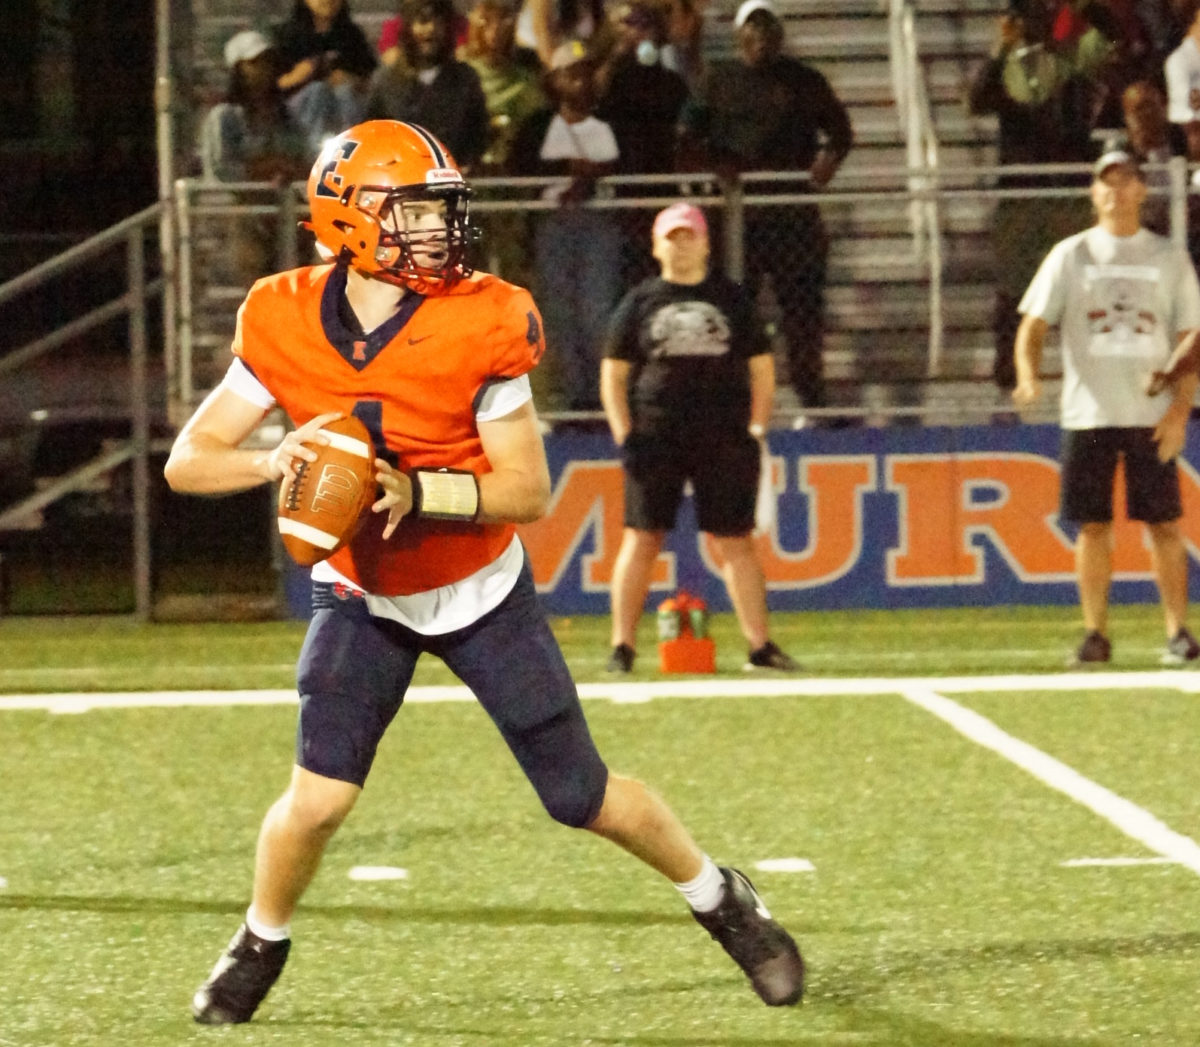 Colin+Livatino+set+the+school+record+for+passing+yards+with+406+against+Glenbrook+South+on+Sept.+22.